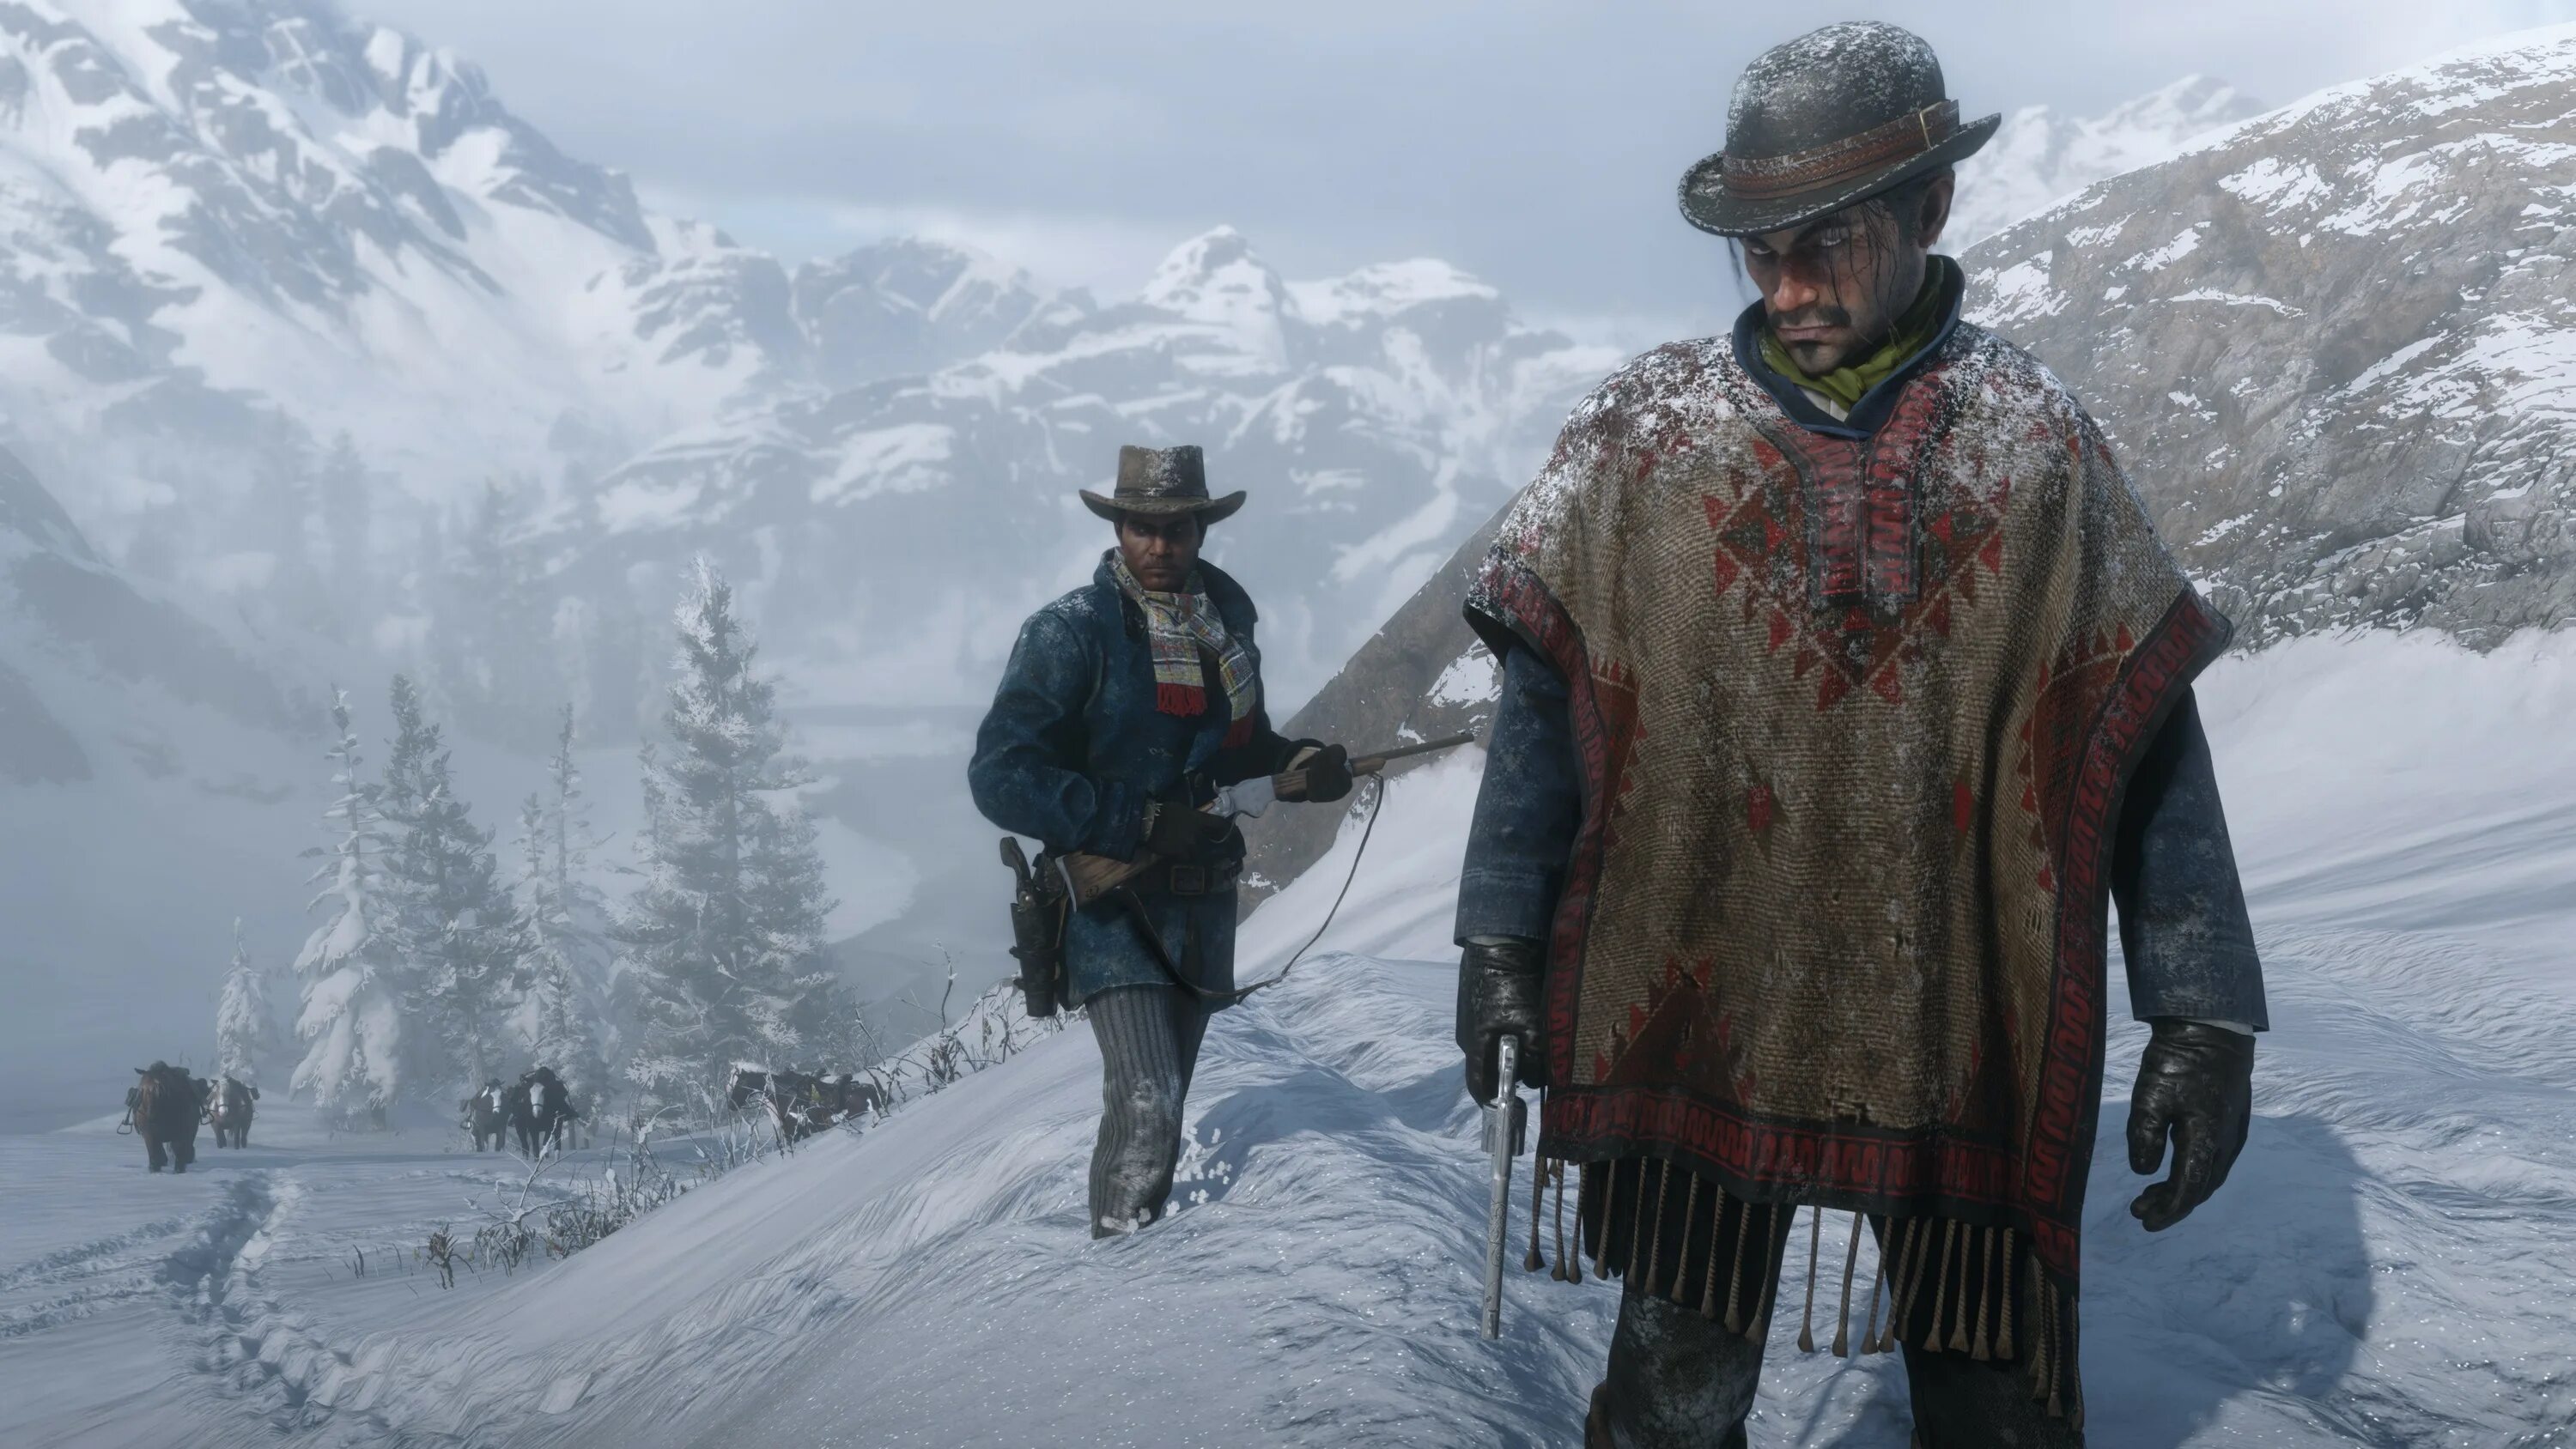 Red Dead Redemption 2. Rdr2 на ПК. Red Dead Redemption 2 (PC). Red Dead Redemption 2 последняя версия.